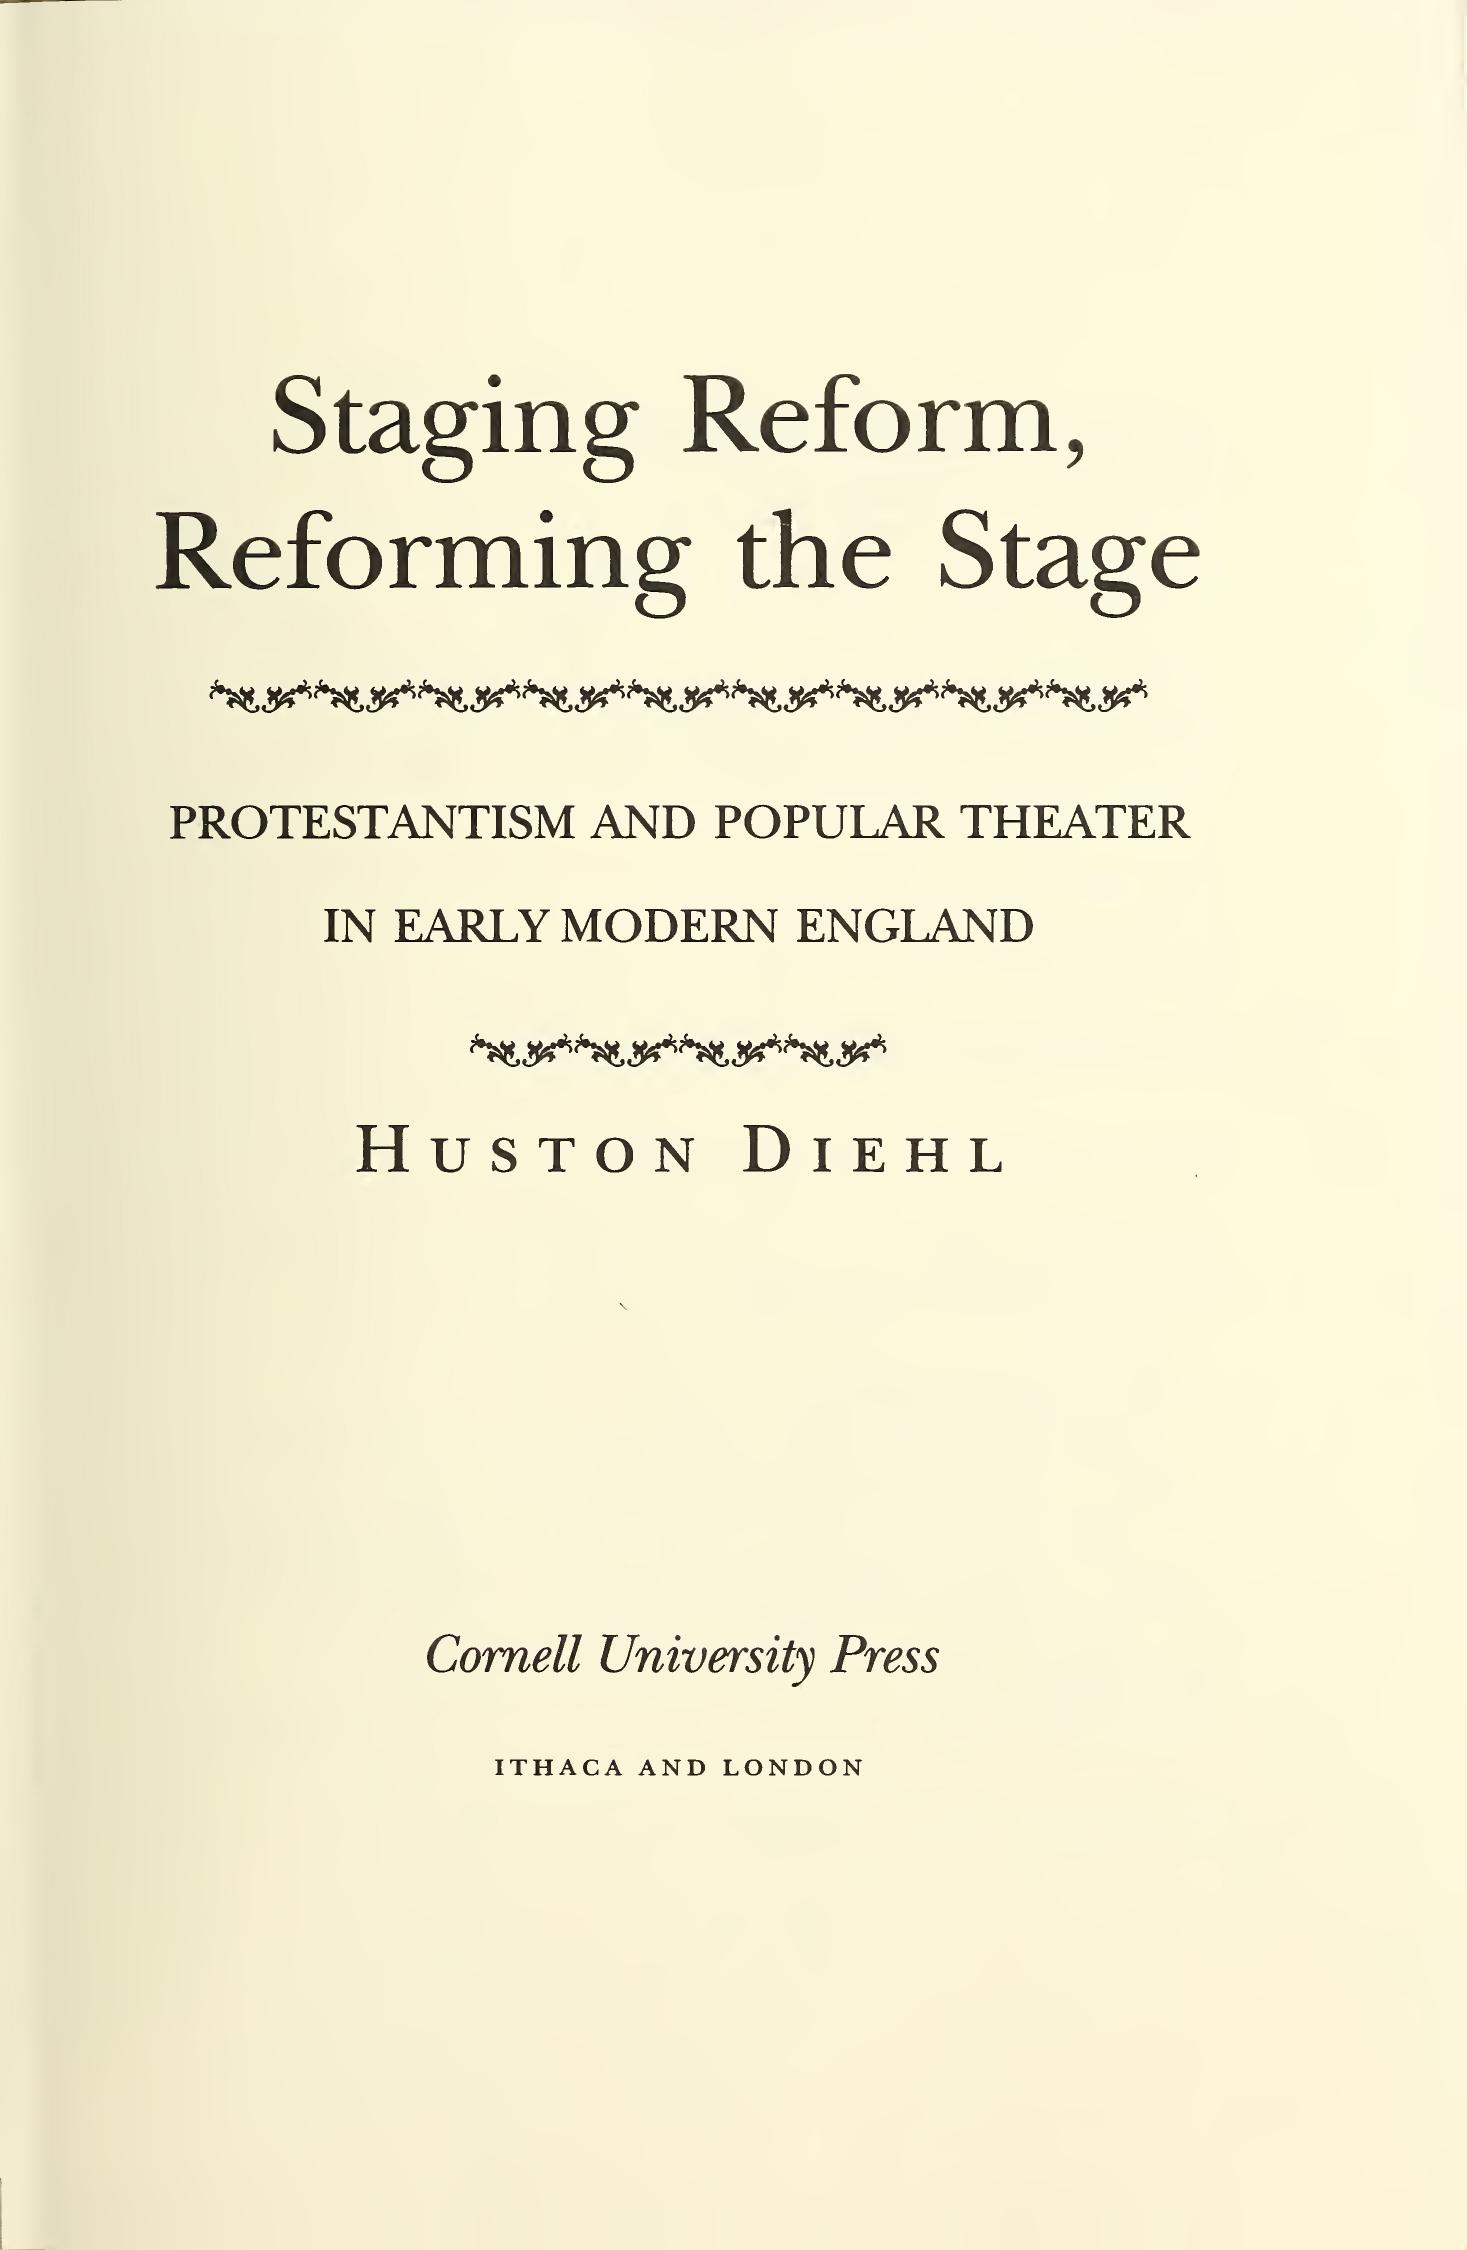 Staging Reform, Reforming the Stage: Protestantism and Popular Theater in Early Modern England by Huston Diehl